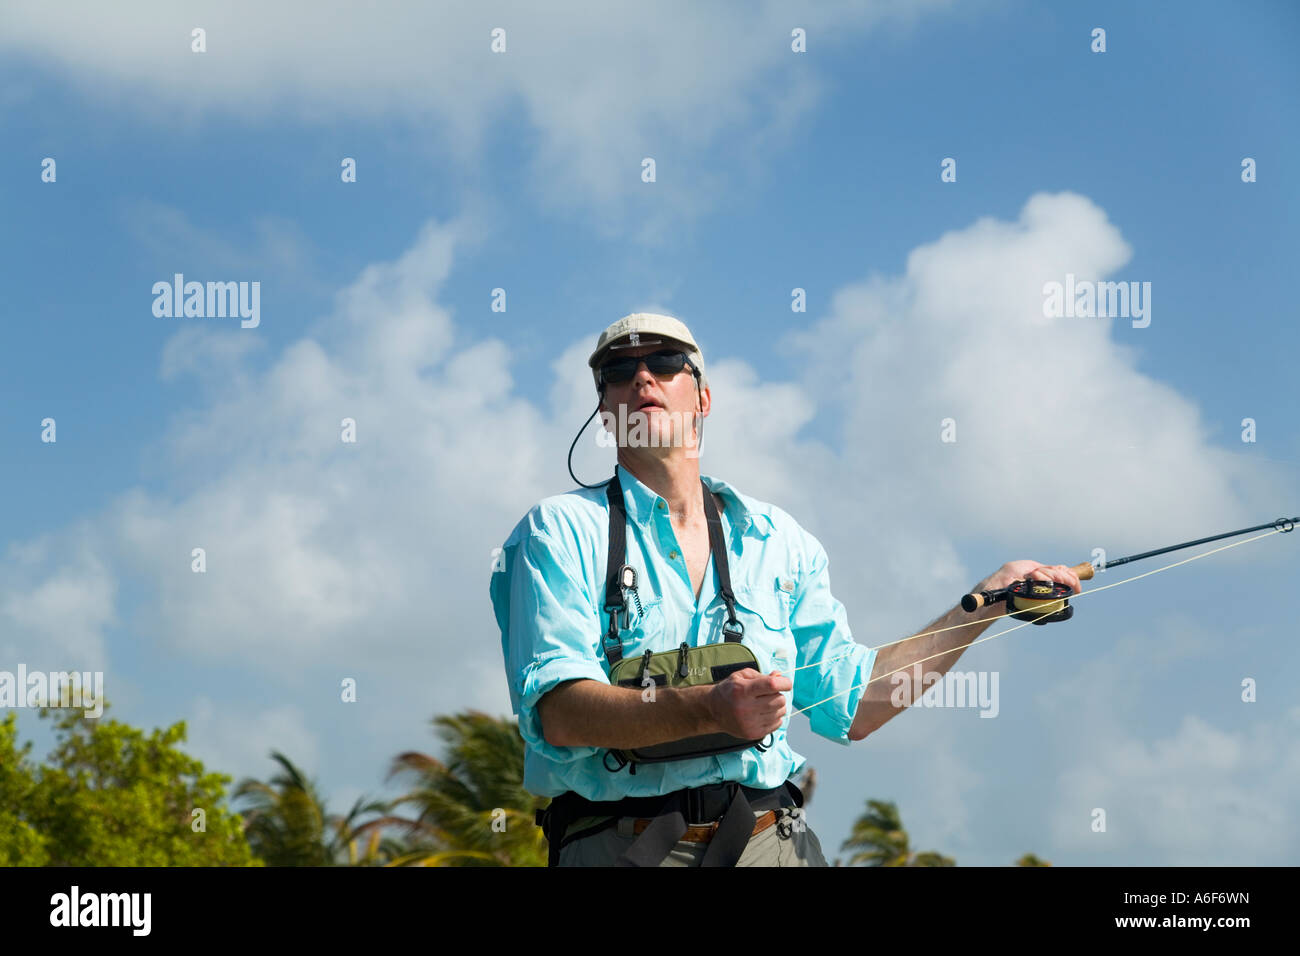 https://c8.alamy.com/comp/A6F6WN/belize-ambergris-caye-adult-male-fly-fishing-in-flats-along-shoreline-A6F6WN.jpg